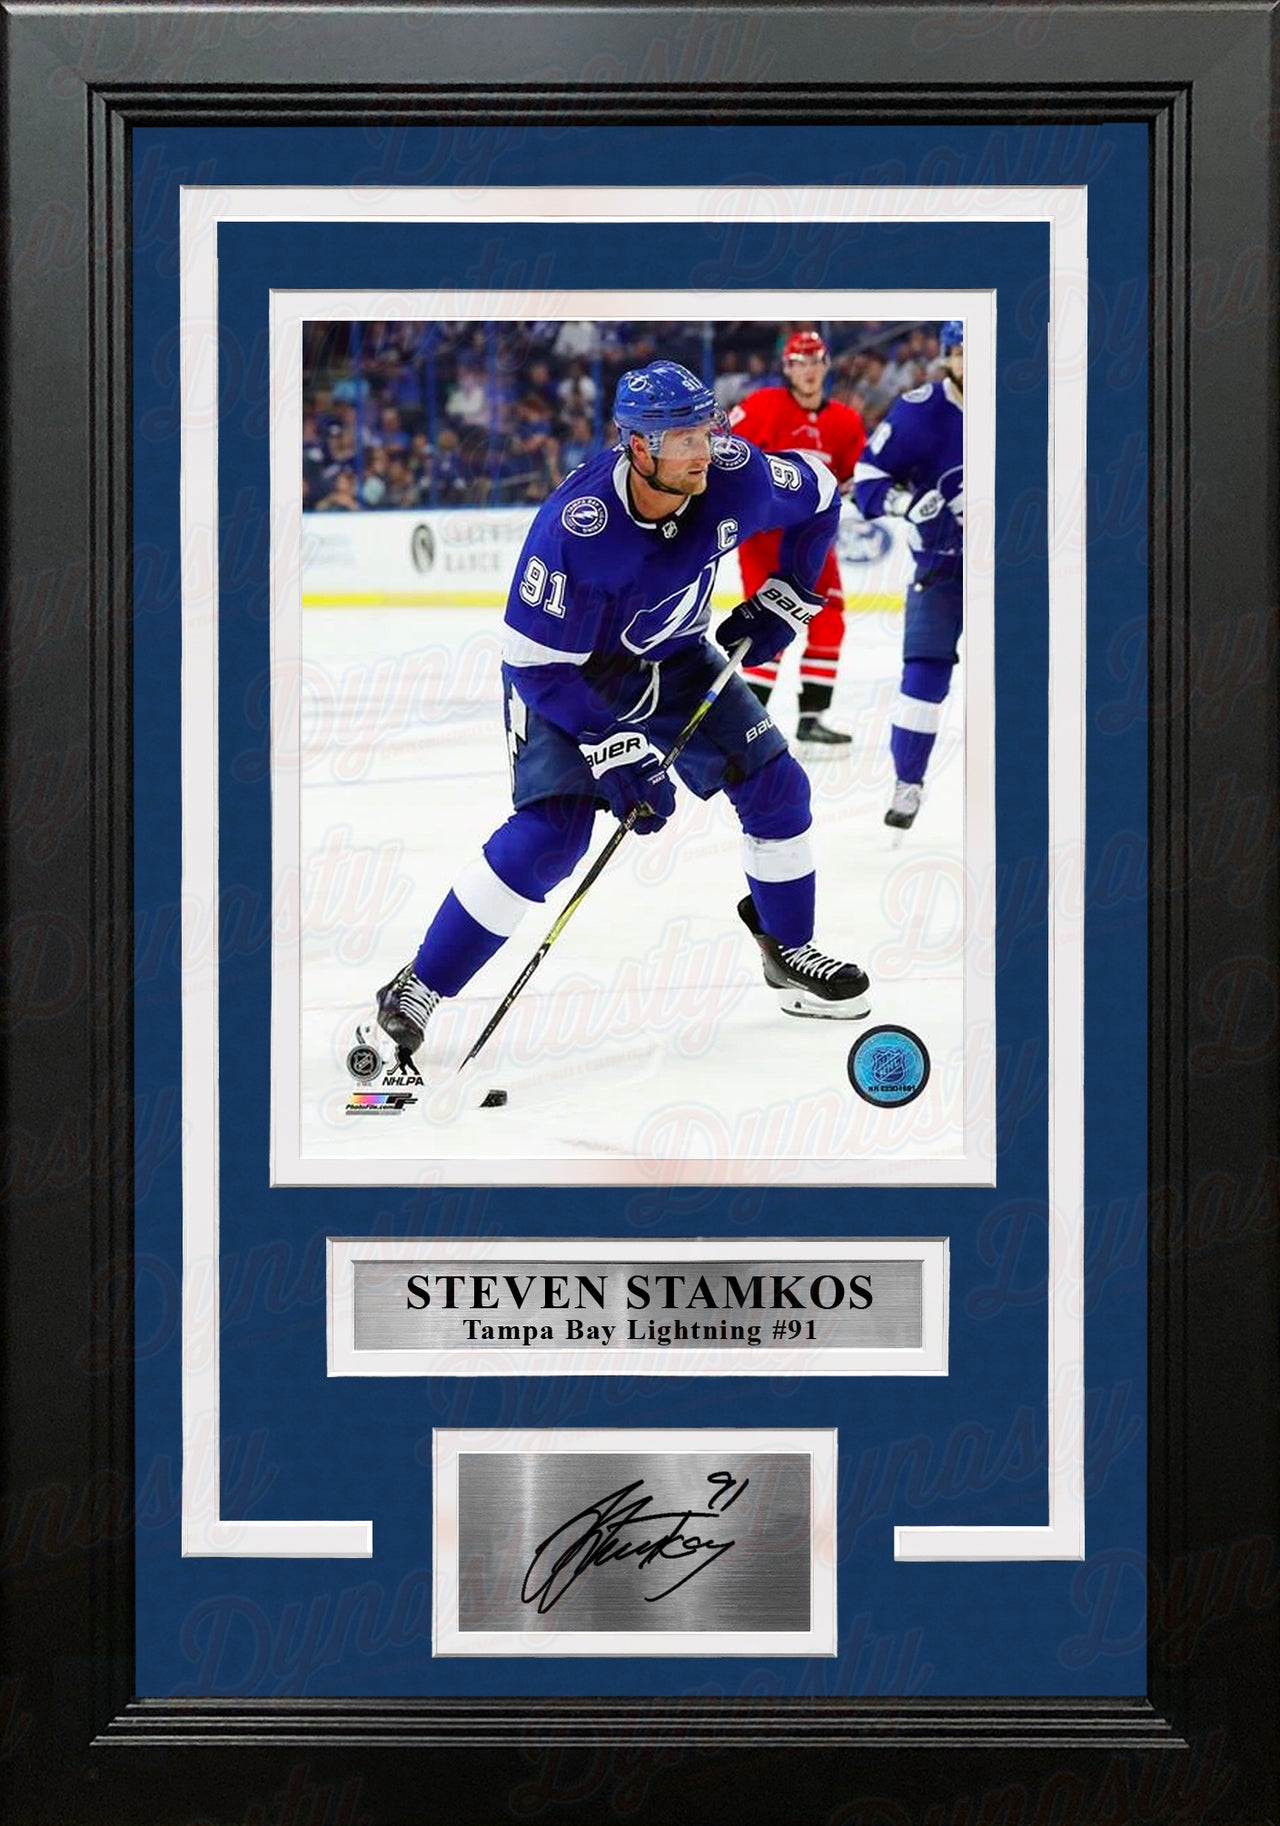 Steven Stamkos in Action Tampa Bay Lightning 8" x 10" Framed Hockey Photo with Engraved Autograph - Dynasty Sports & Framing 